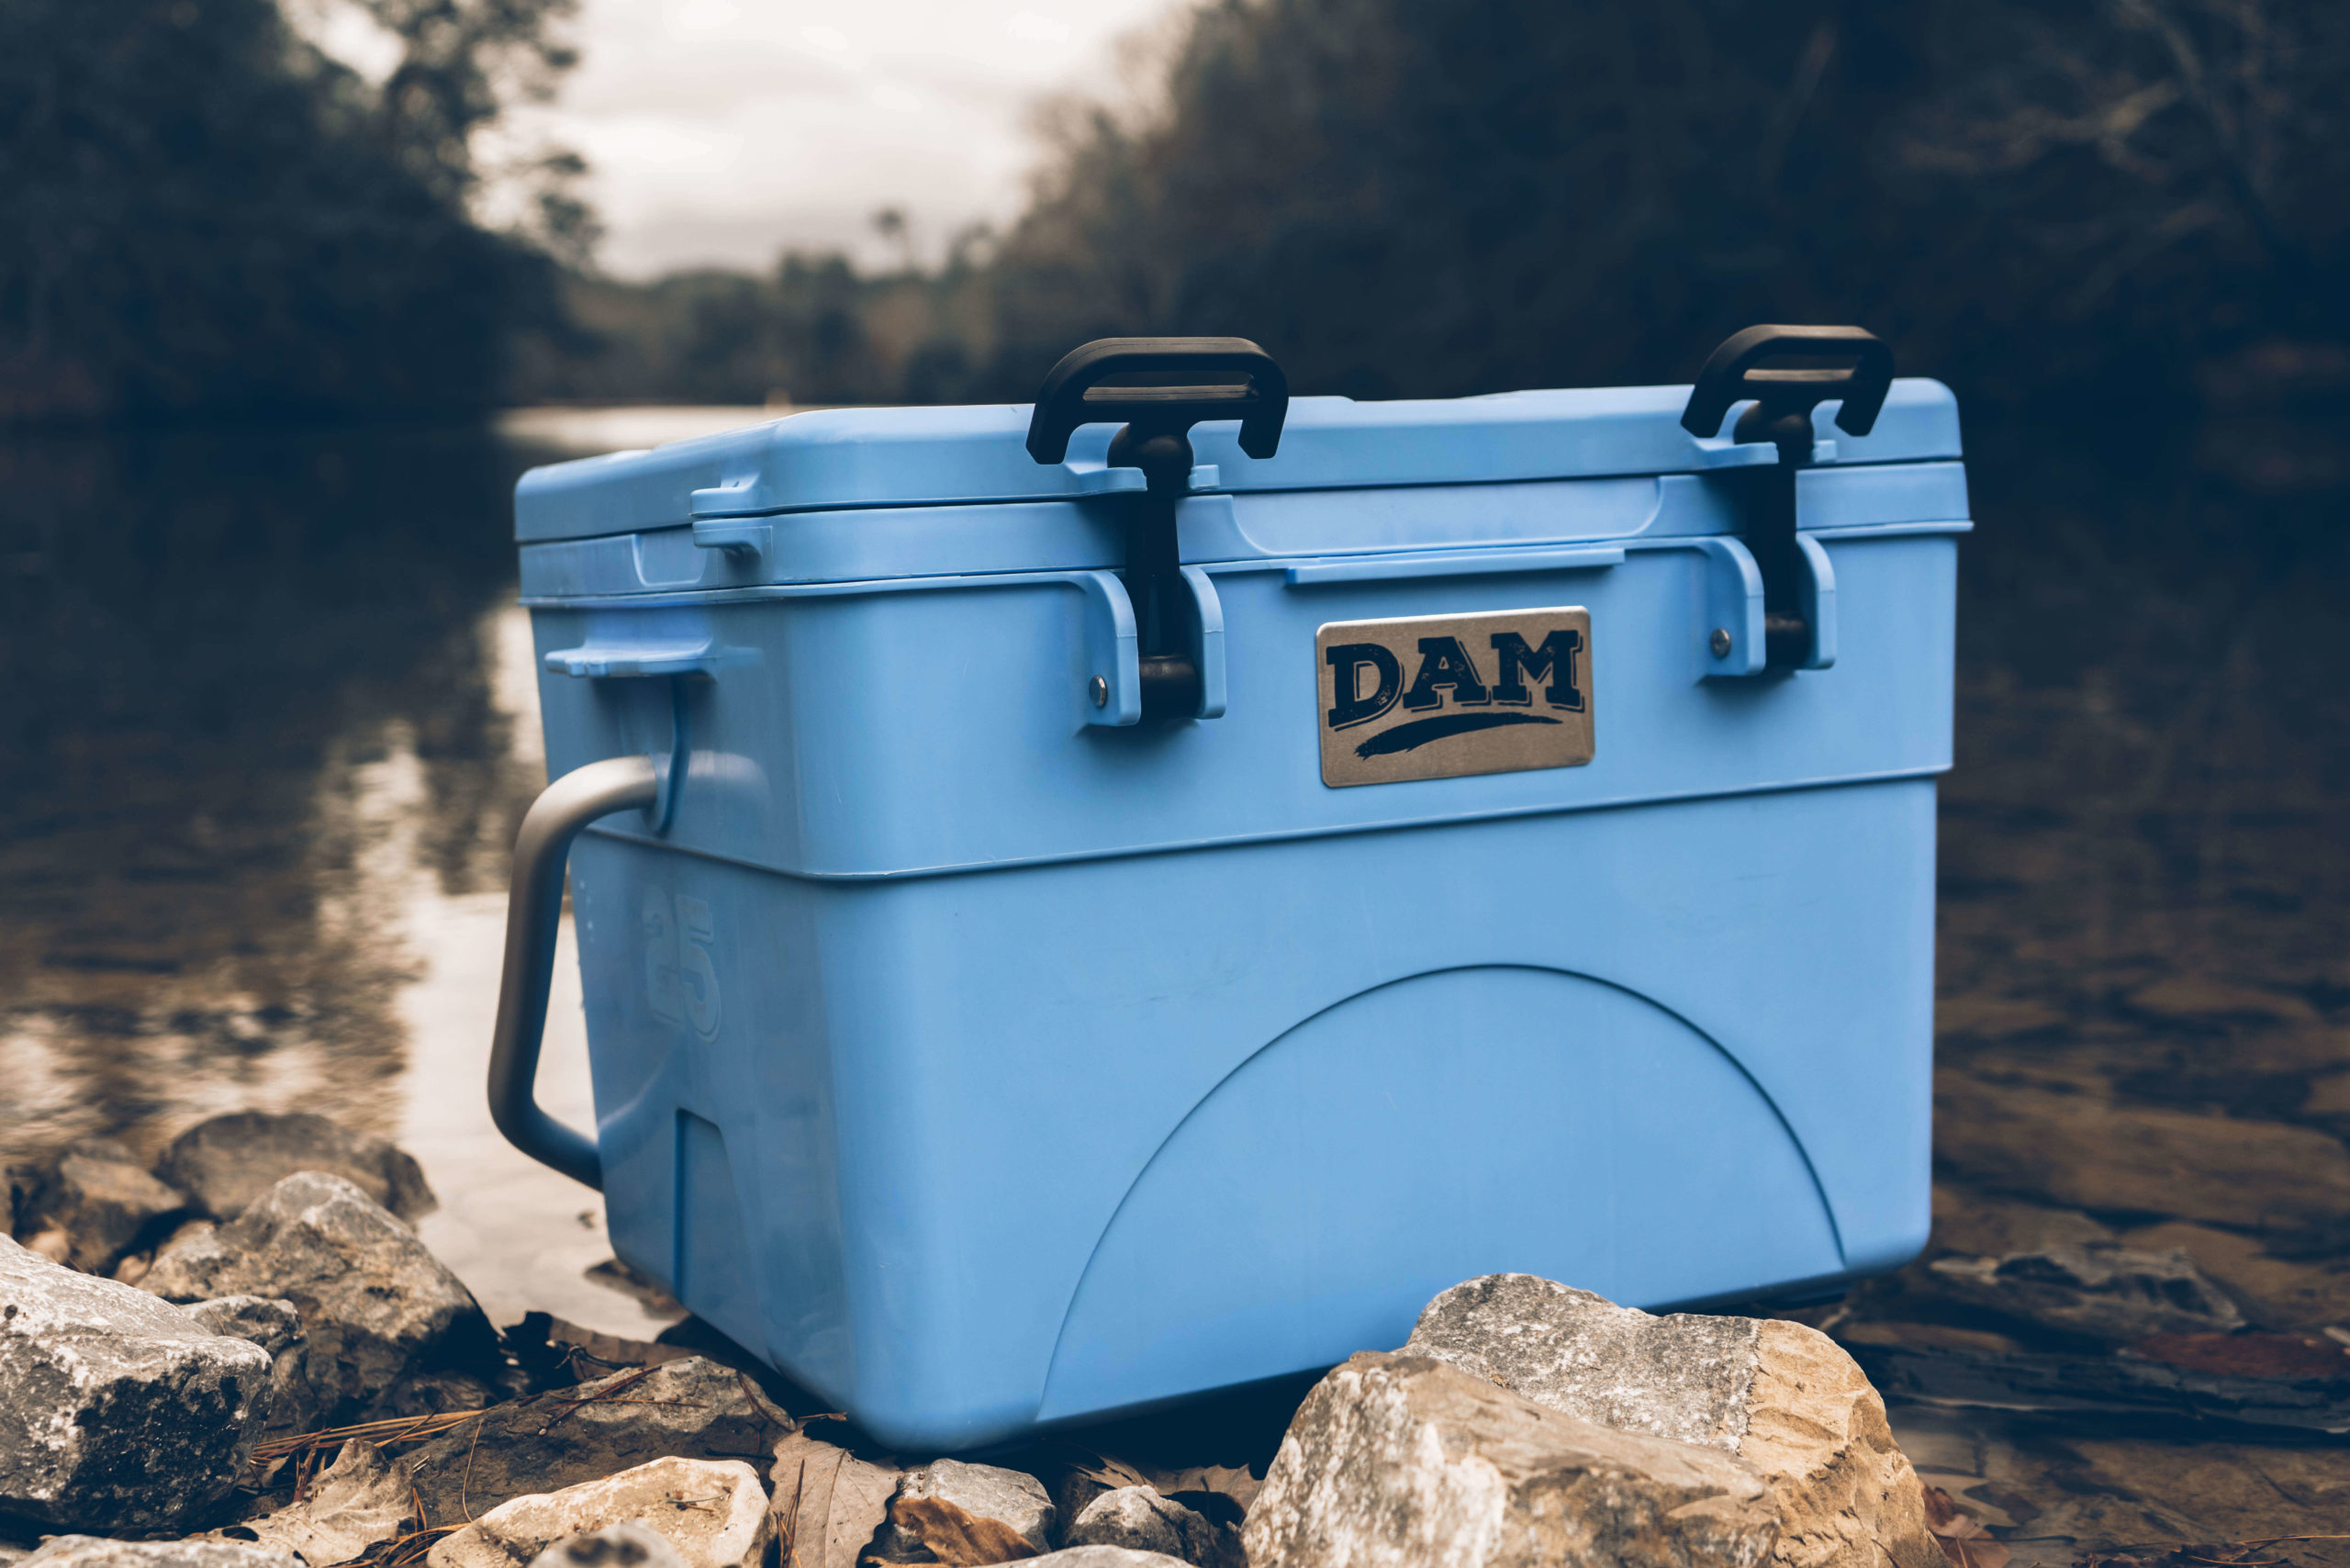 https://www.damcoolers.com/wp-content/uploads/2022/04/Campaign-hard-coolers-dam-1-scaled.jpg